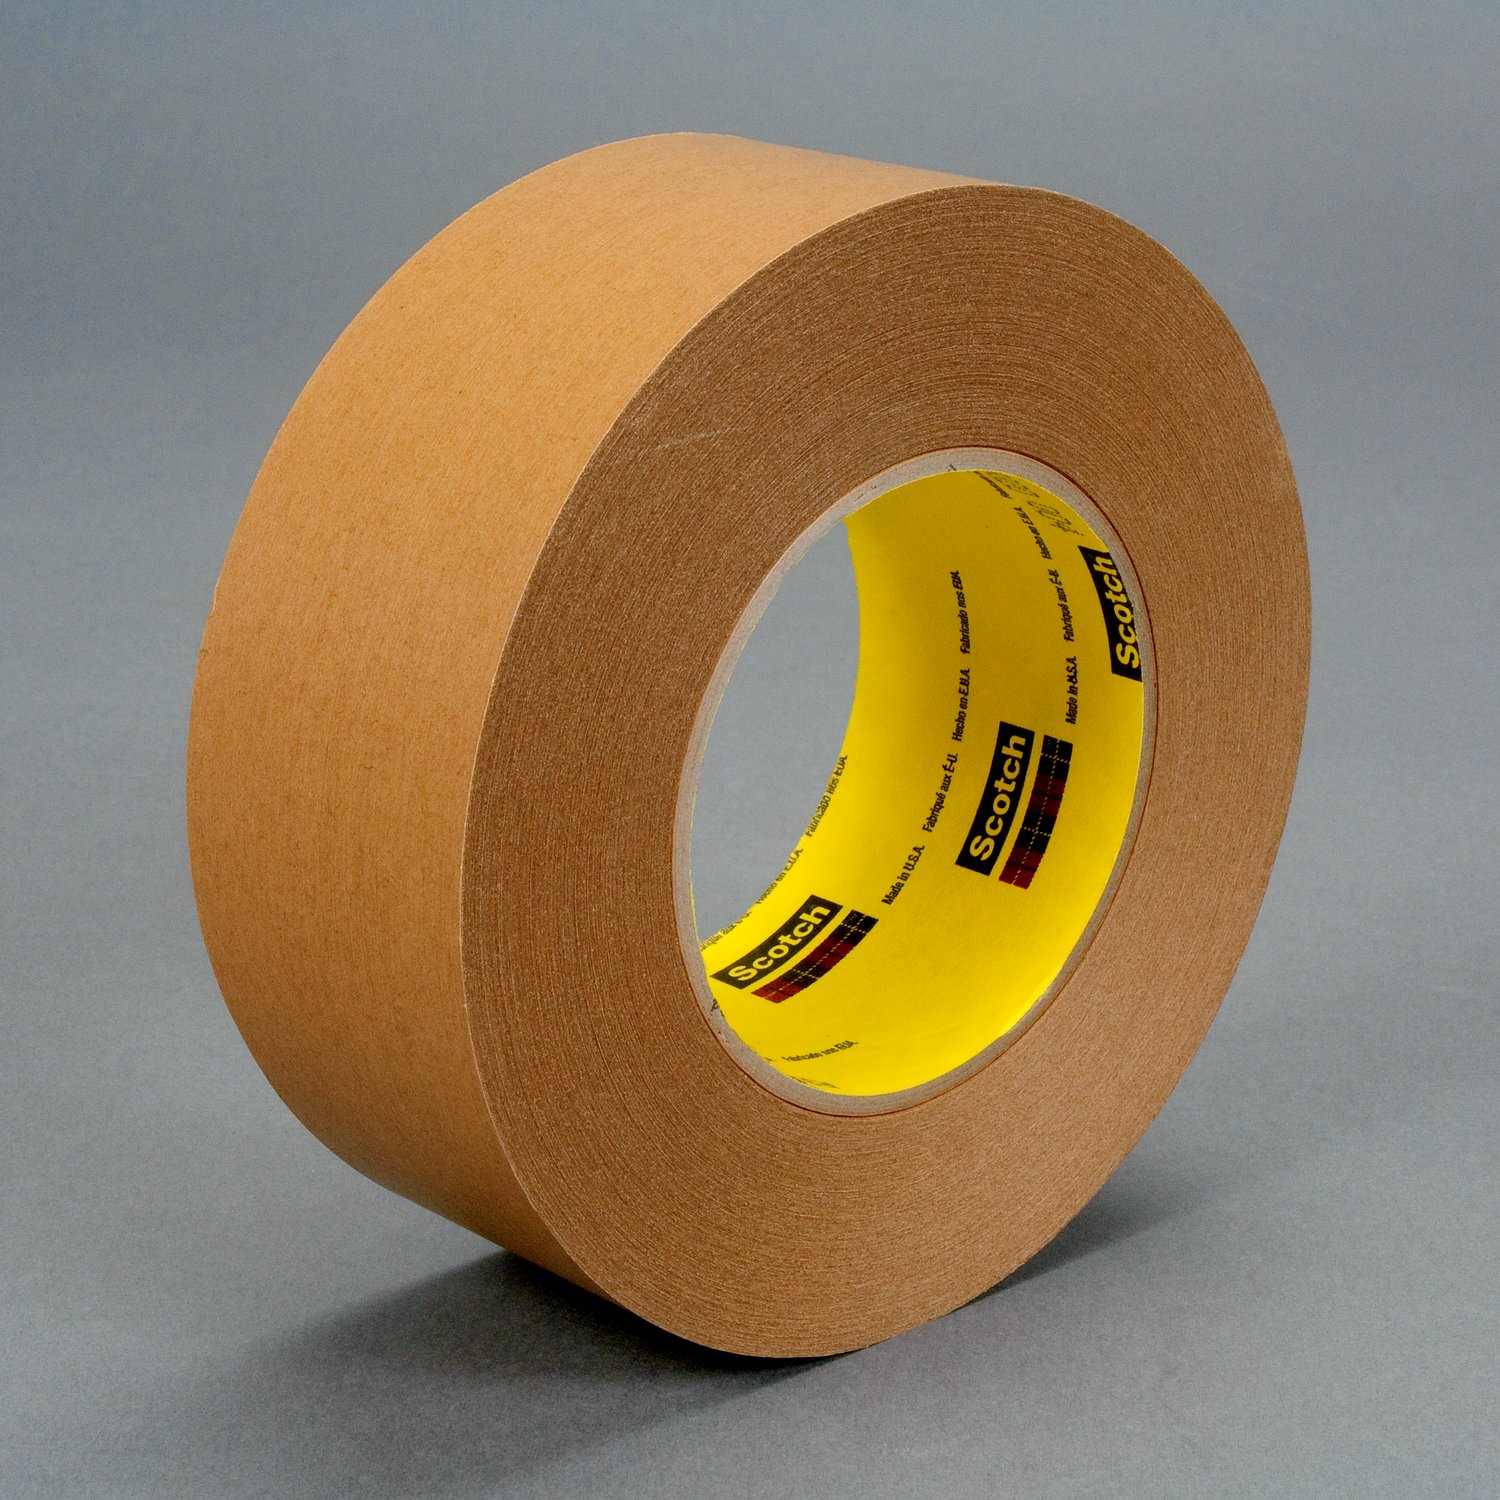 7100028028 - 3M Repulpable Strong Single Coated Tape R3187, Kraft, 48 mm x 110 m,
7.5 mil, 6 rolls per case